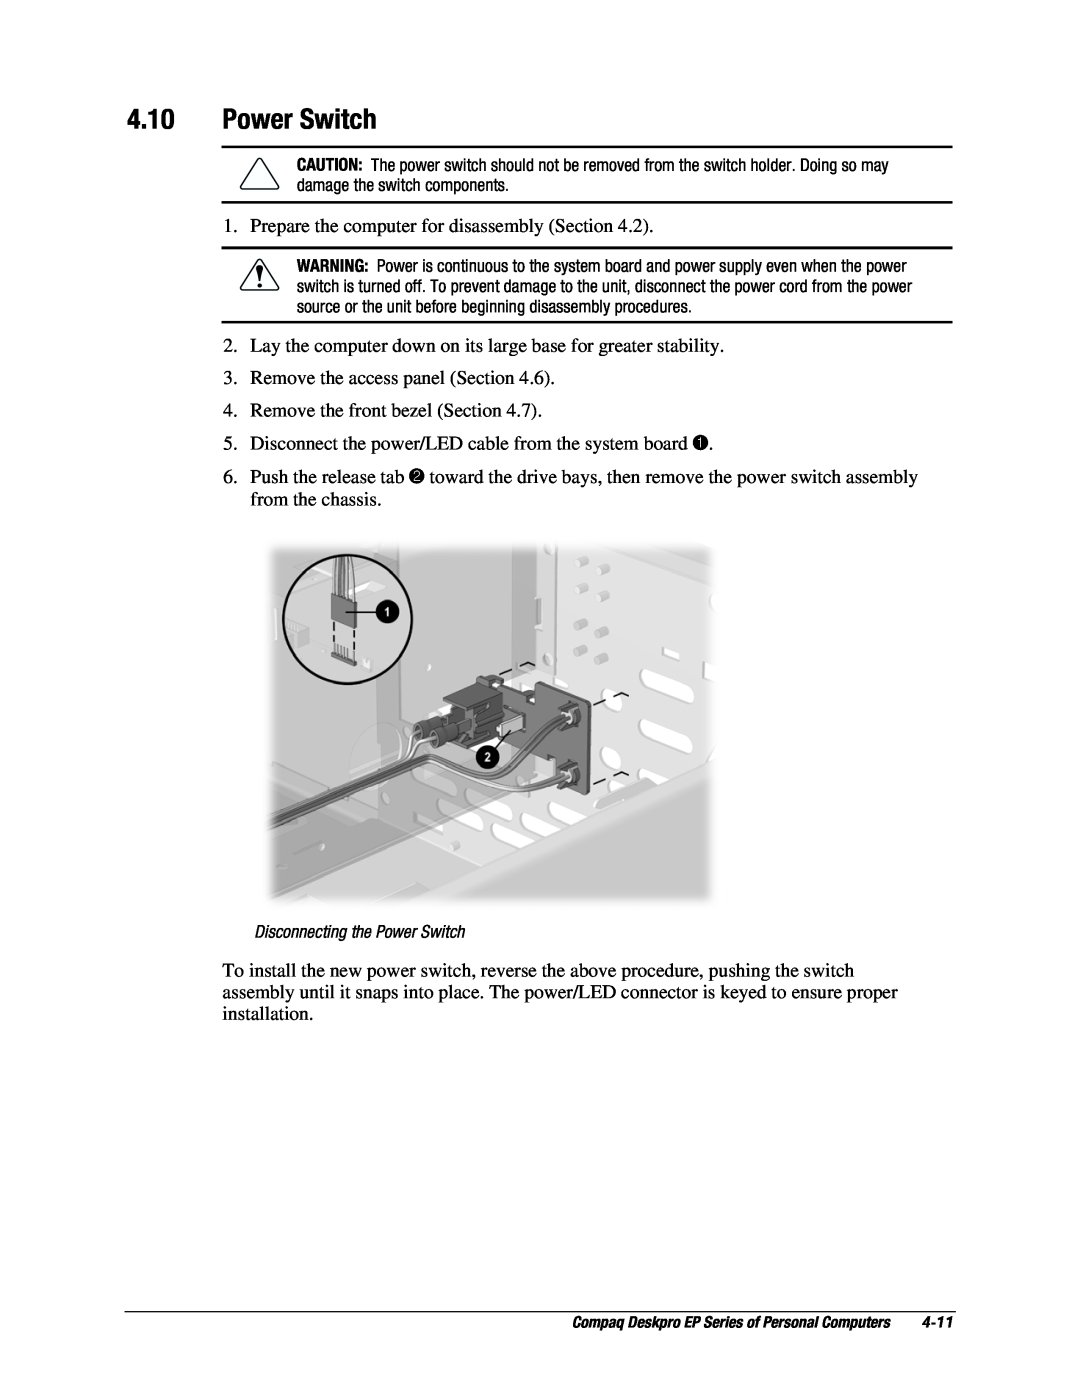 Compaq EP Series manual Disconnecting the Power Switch 